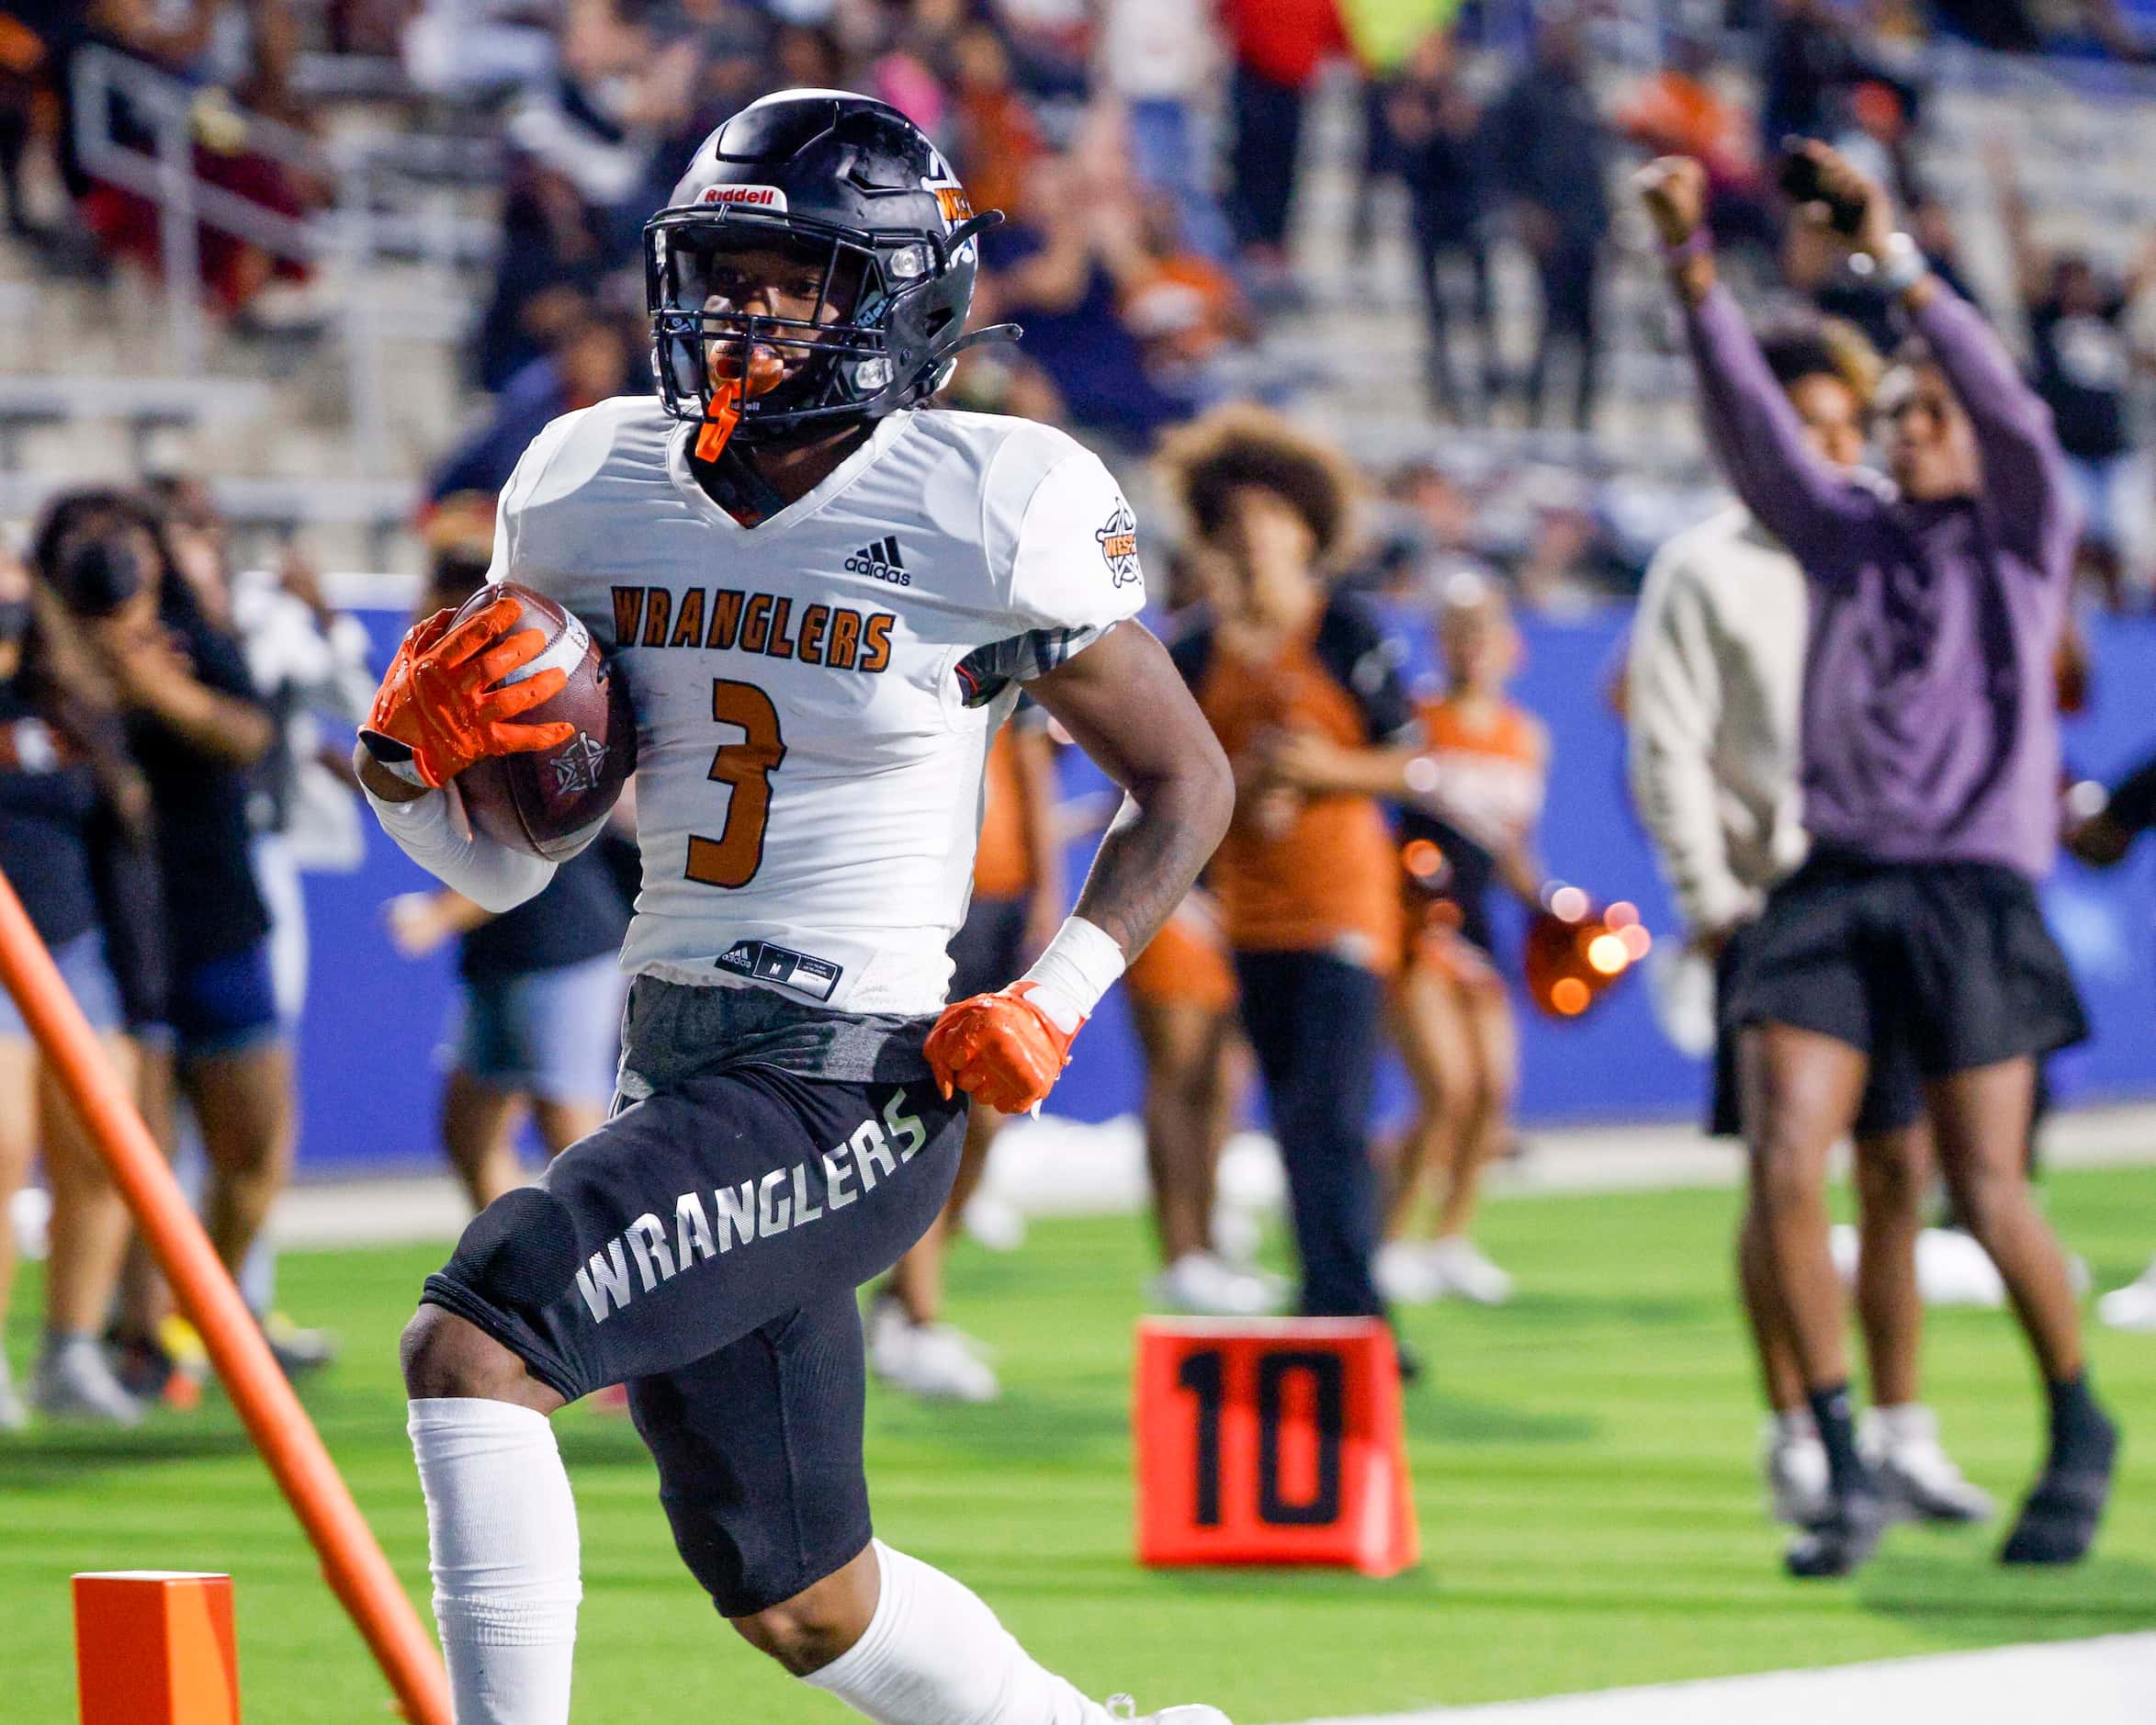 West Mesquite’s Kasen McCoy (3) scores a touchdown during the first half of a high school...